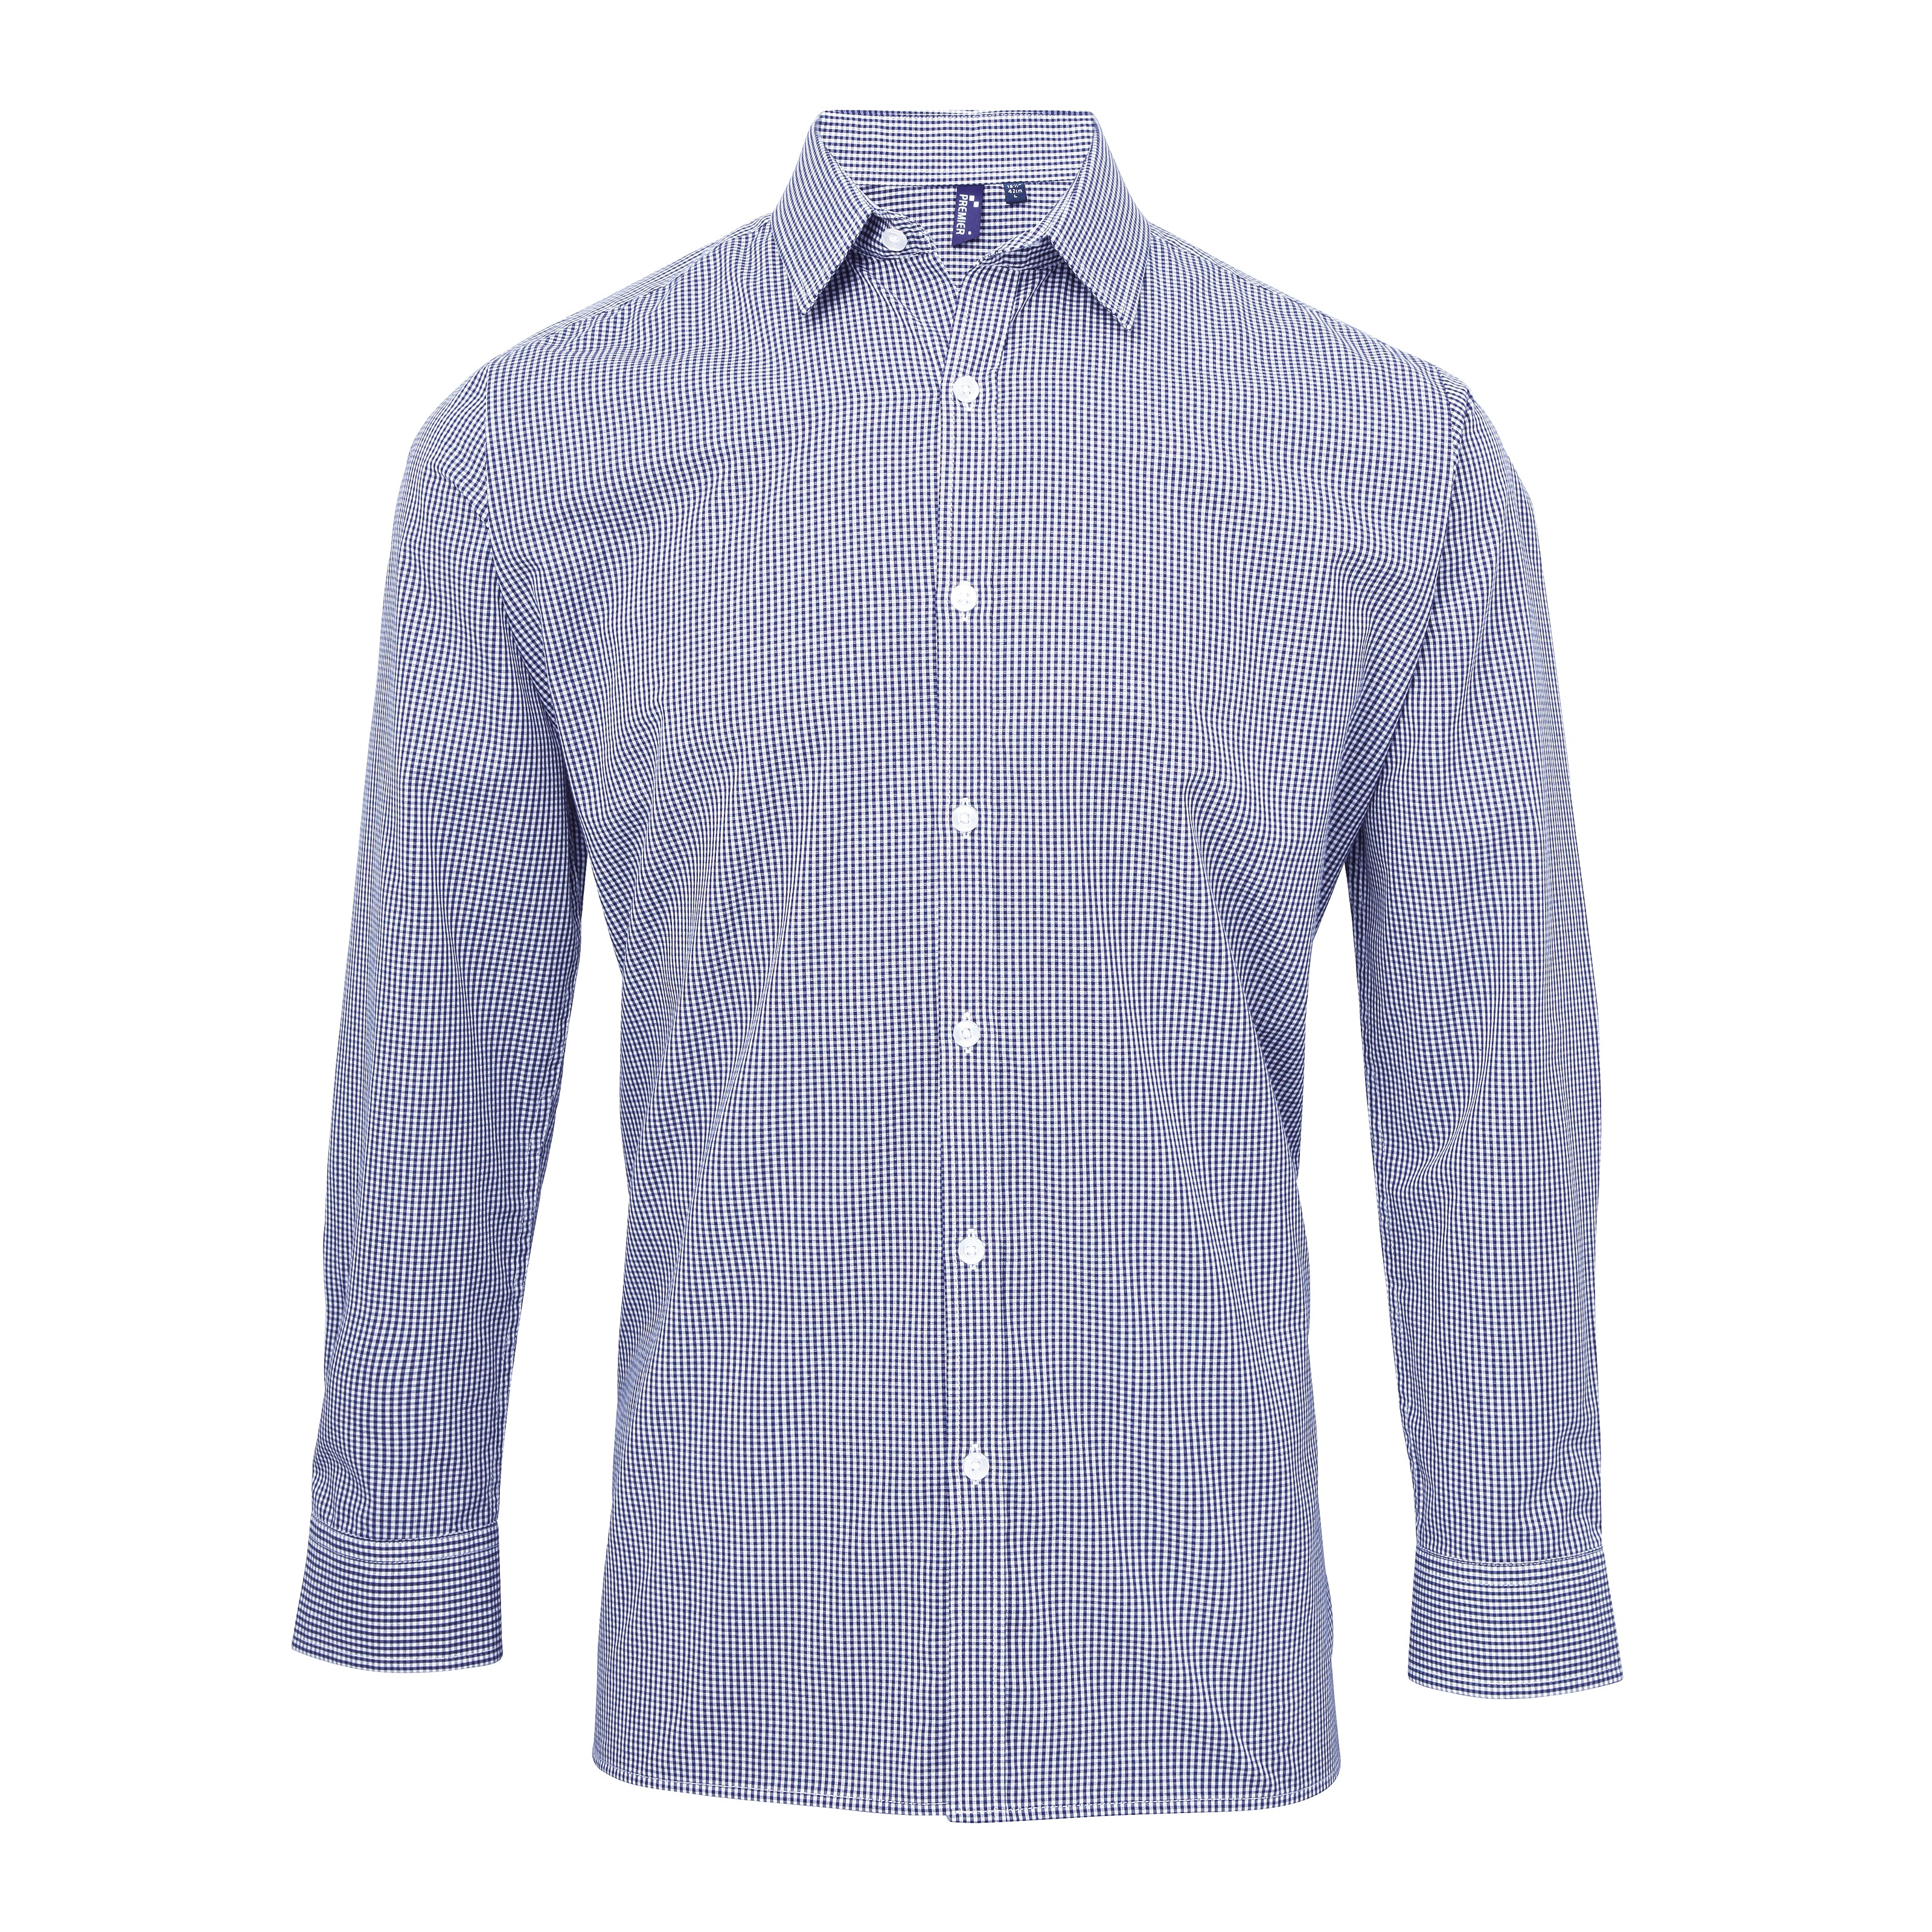 Business Casual Long Sleeve Navy Shirt for Men